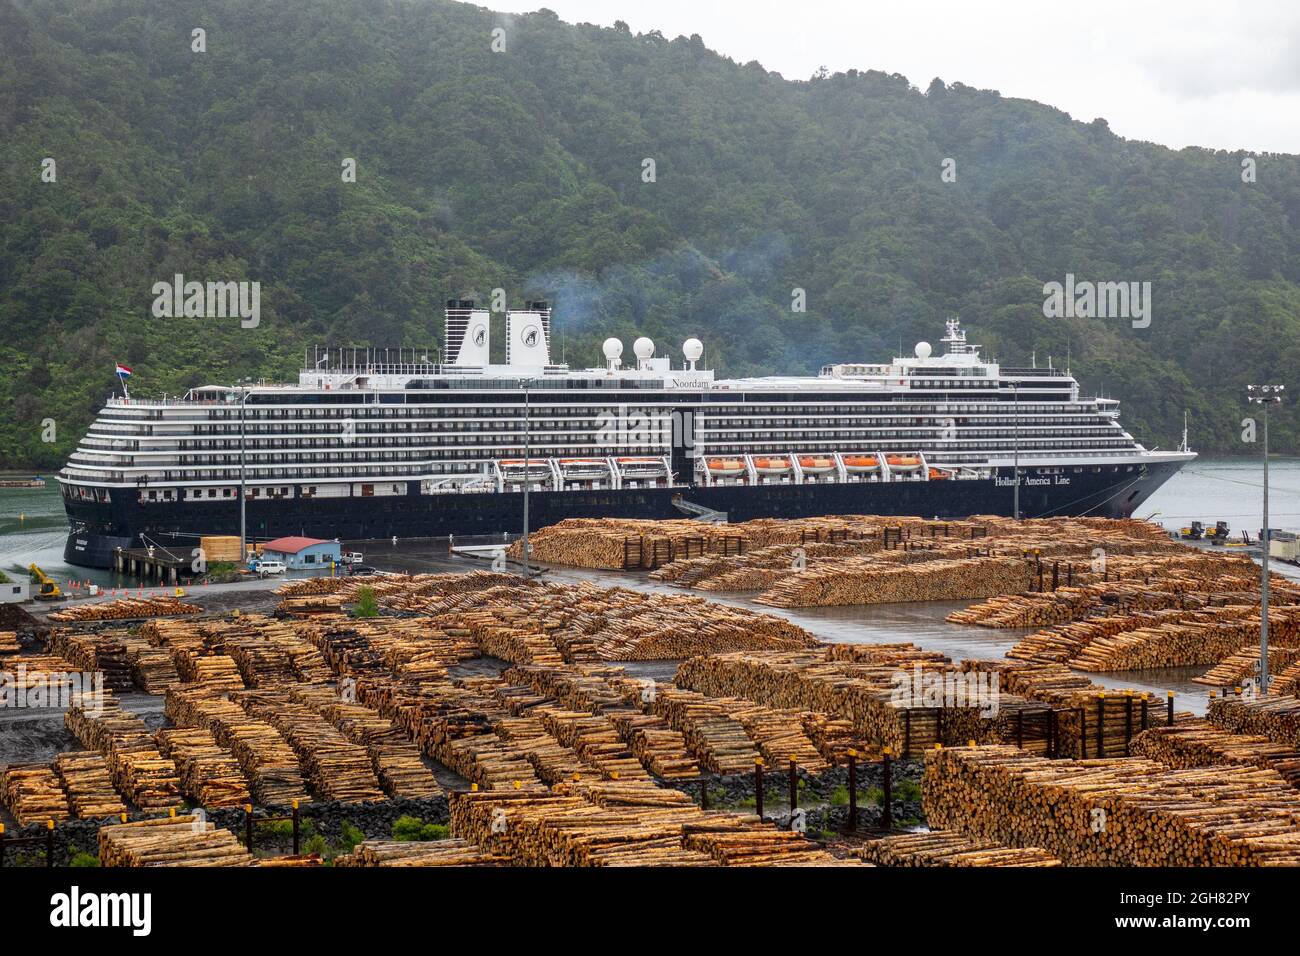 Holland America MS Noordam In The Port of Marlborough Picton New Zealand Export Tree Logs Lumber Timber On The Quayside Stock Photo